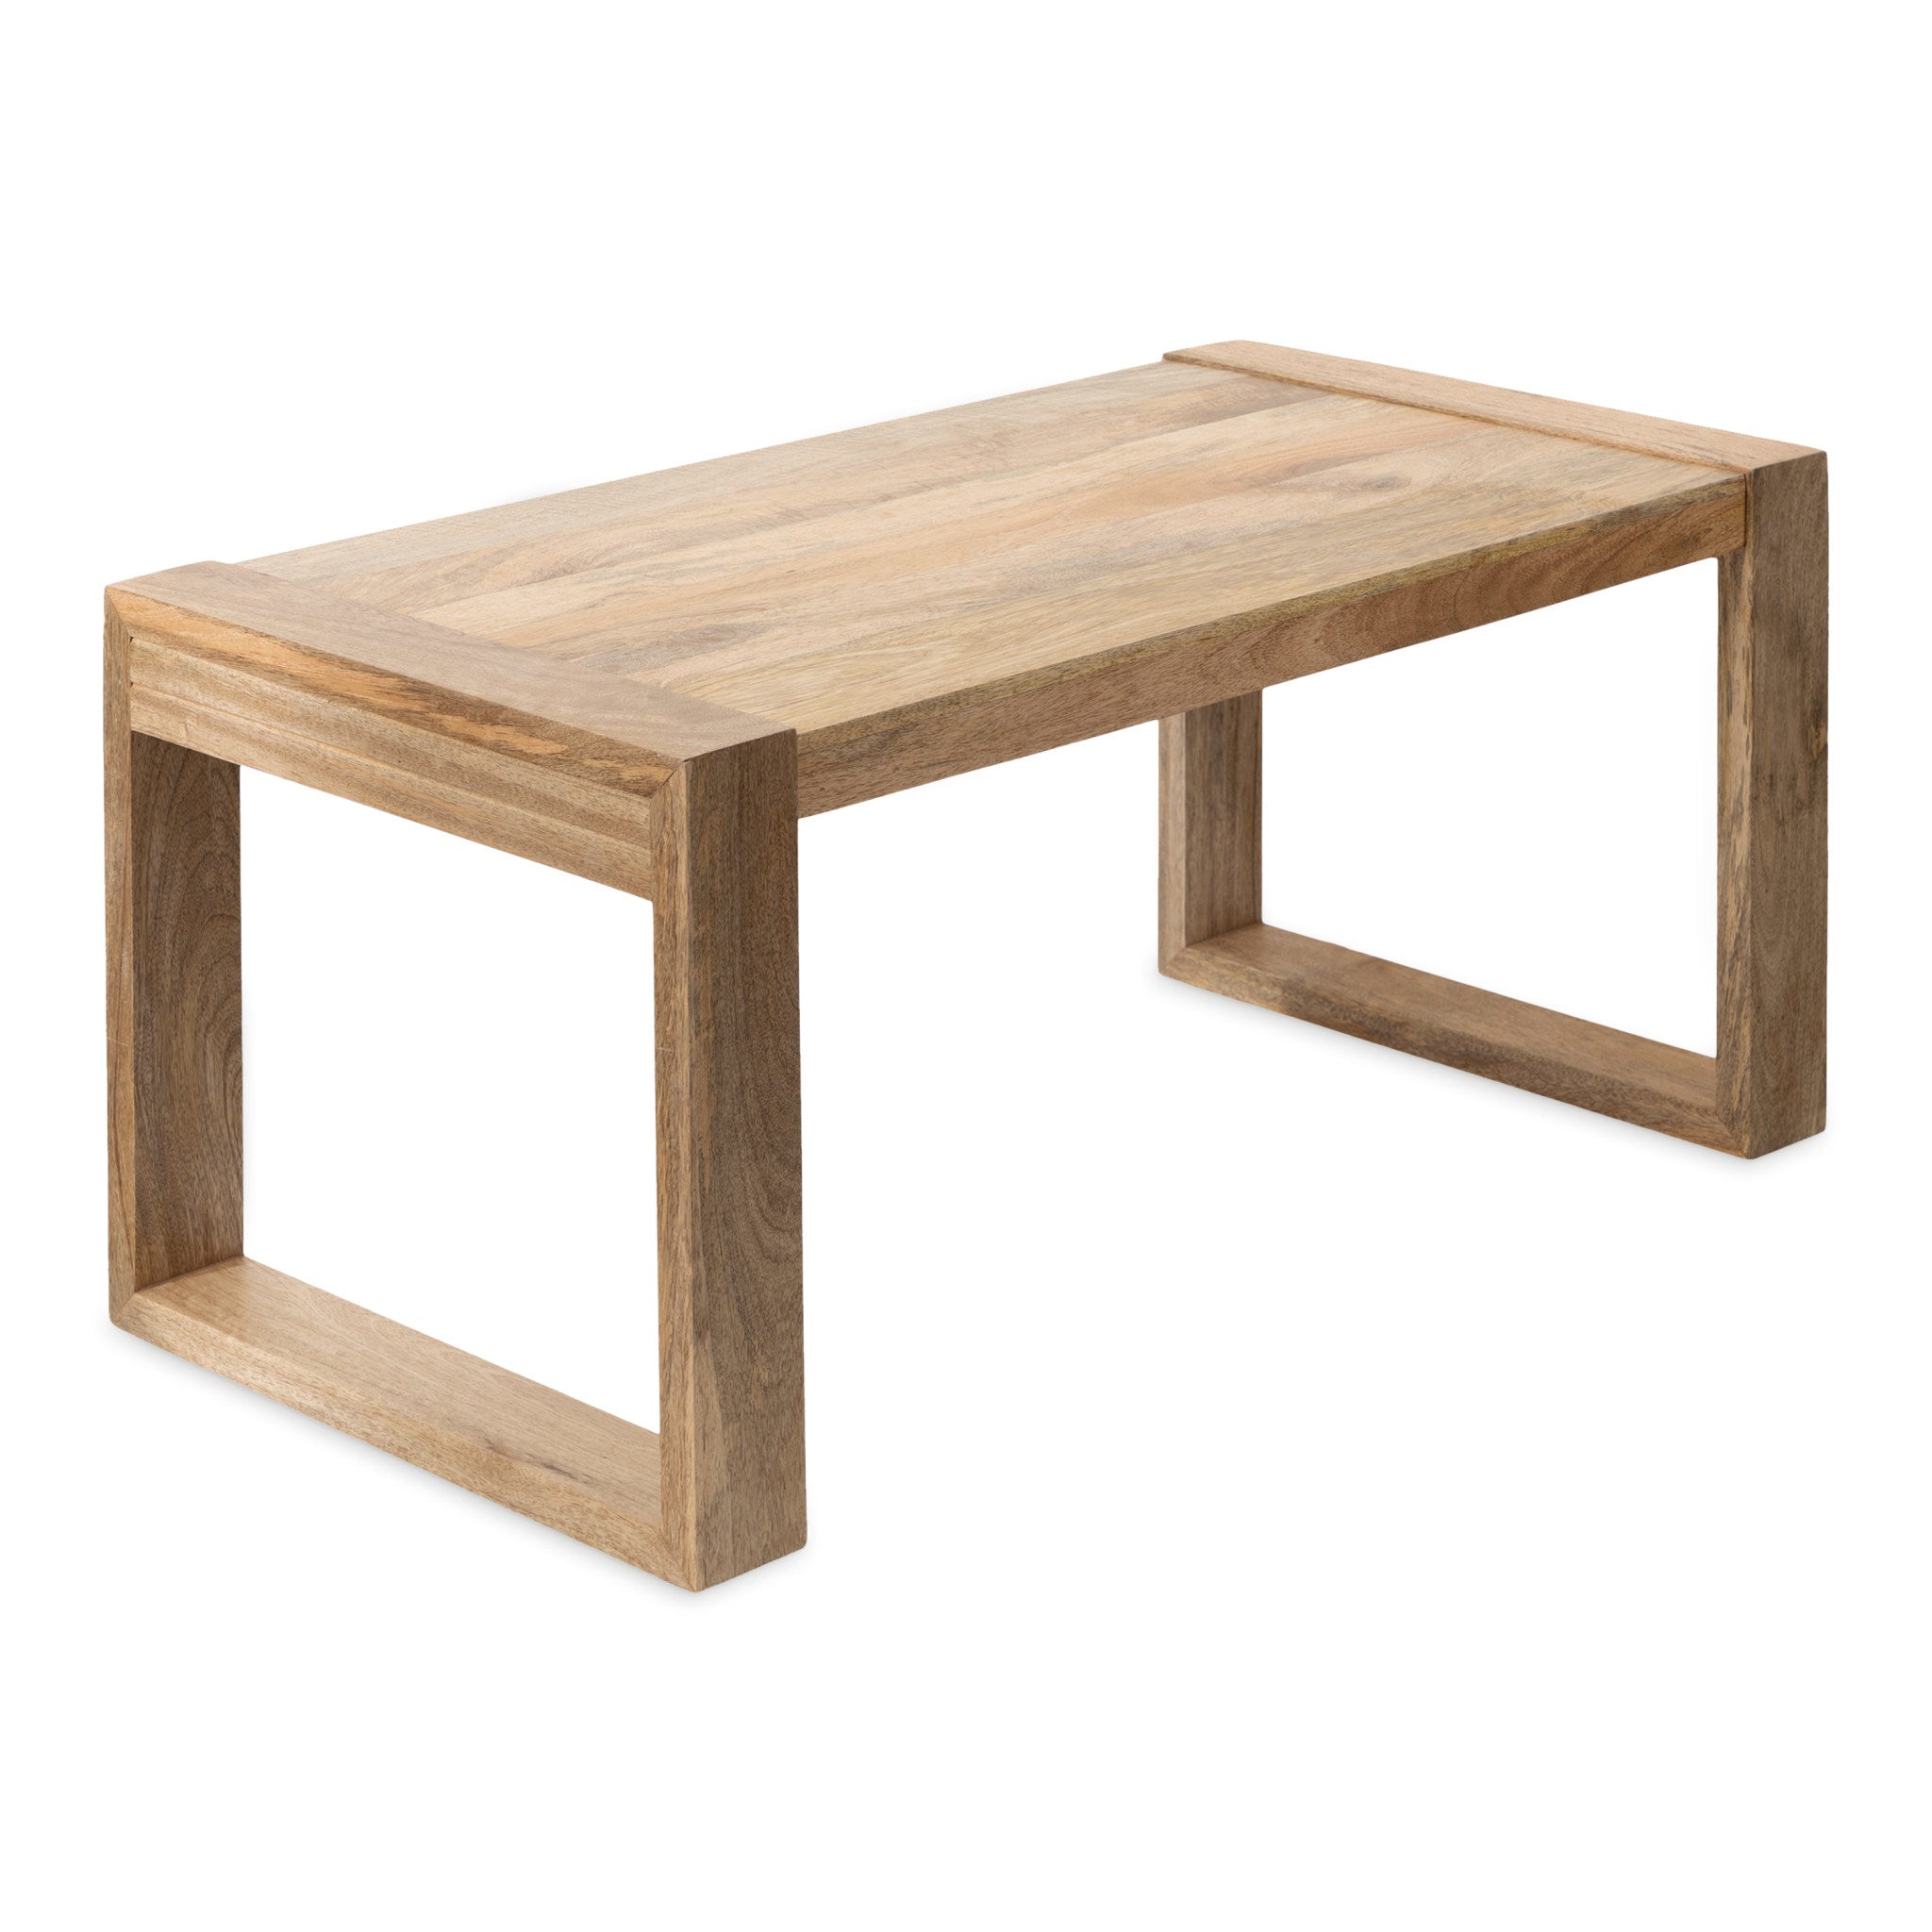 Dhillion Wood Rectangle Coffee Table